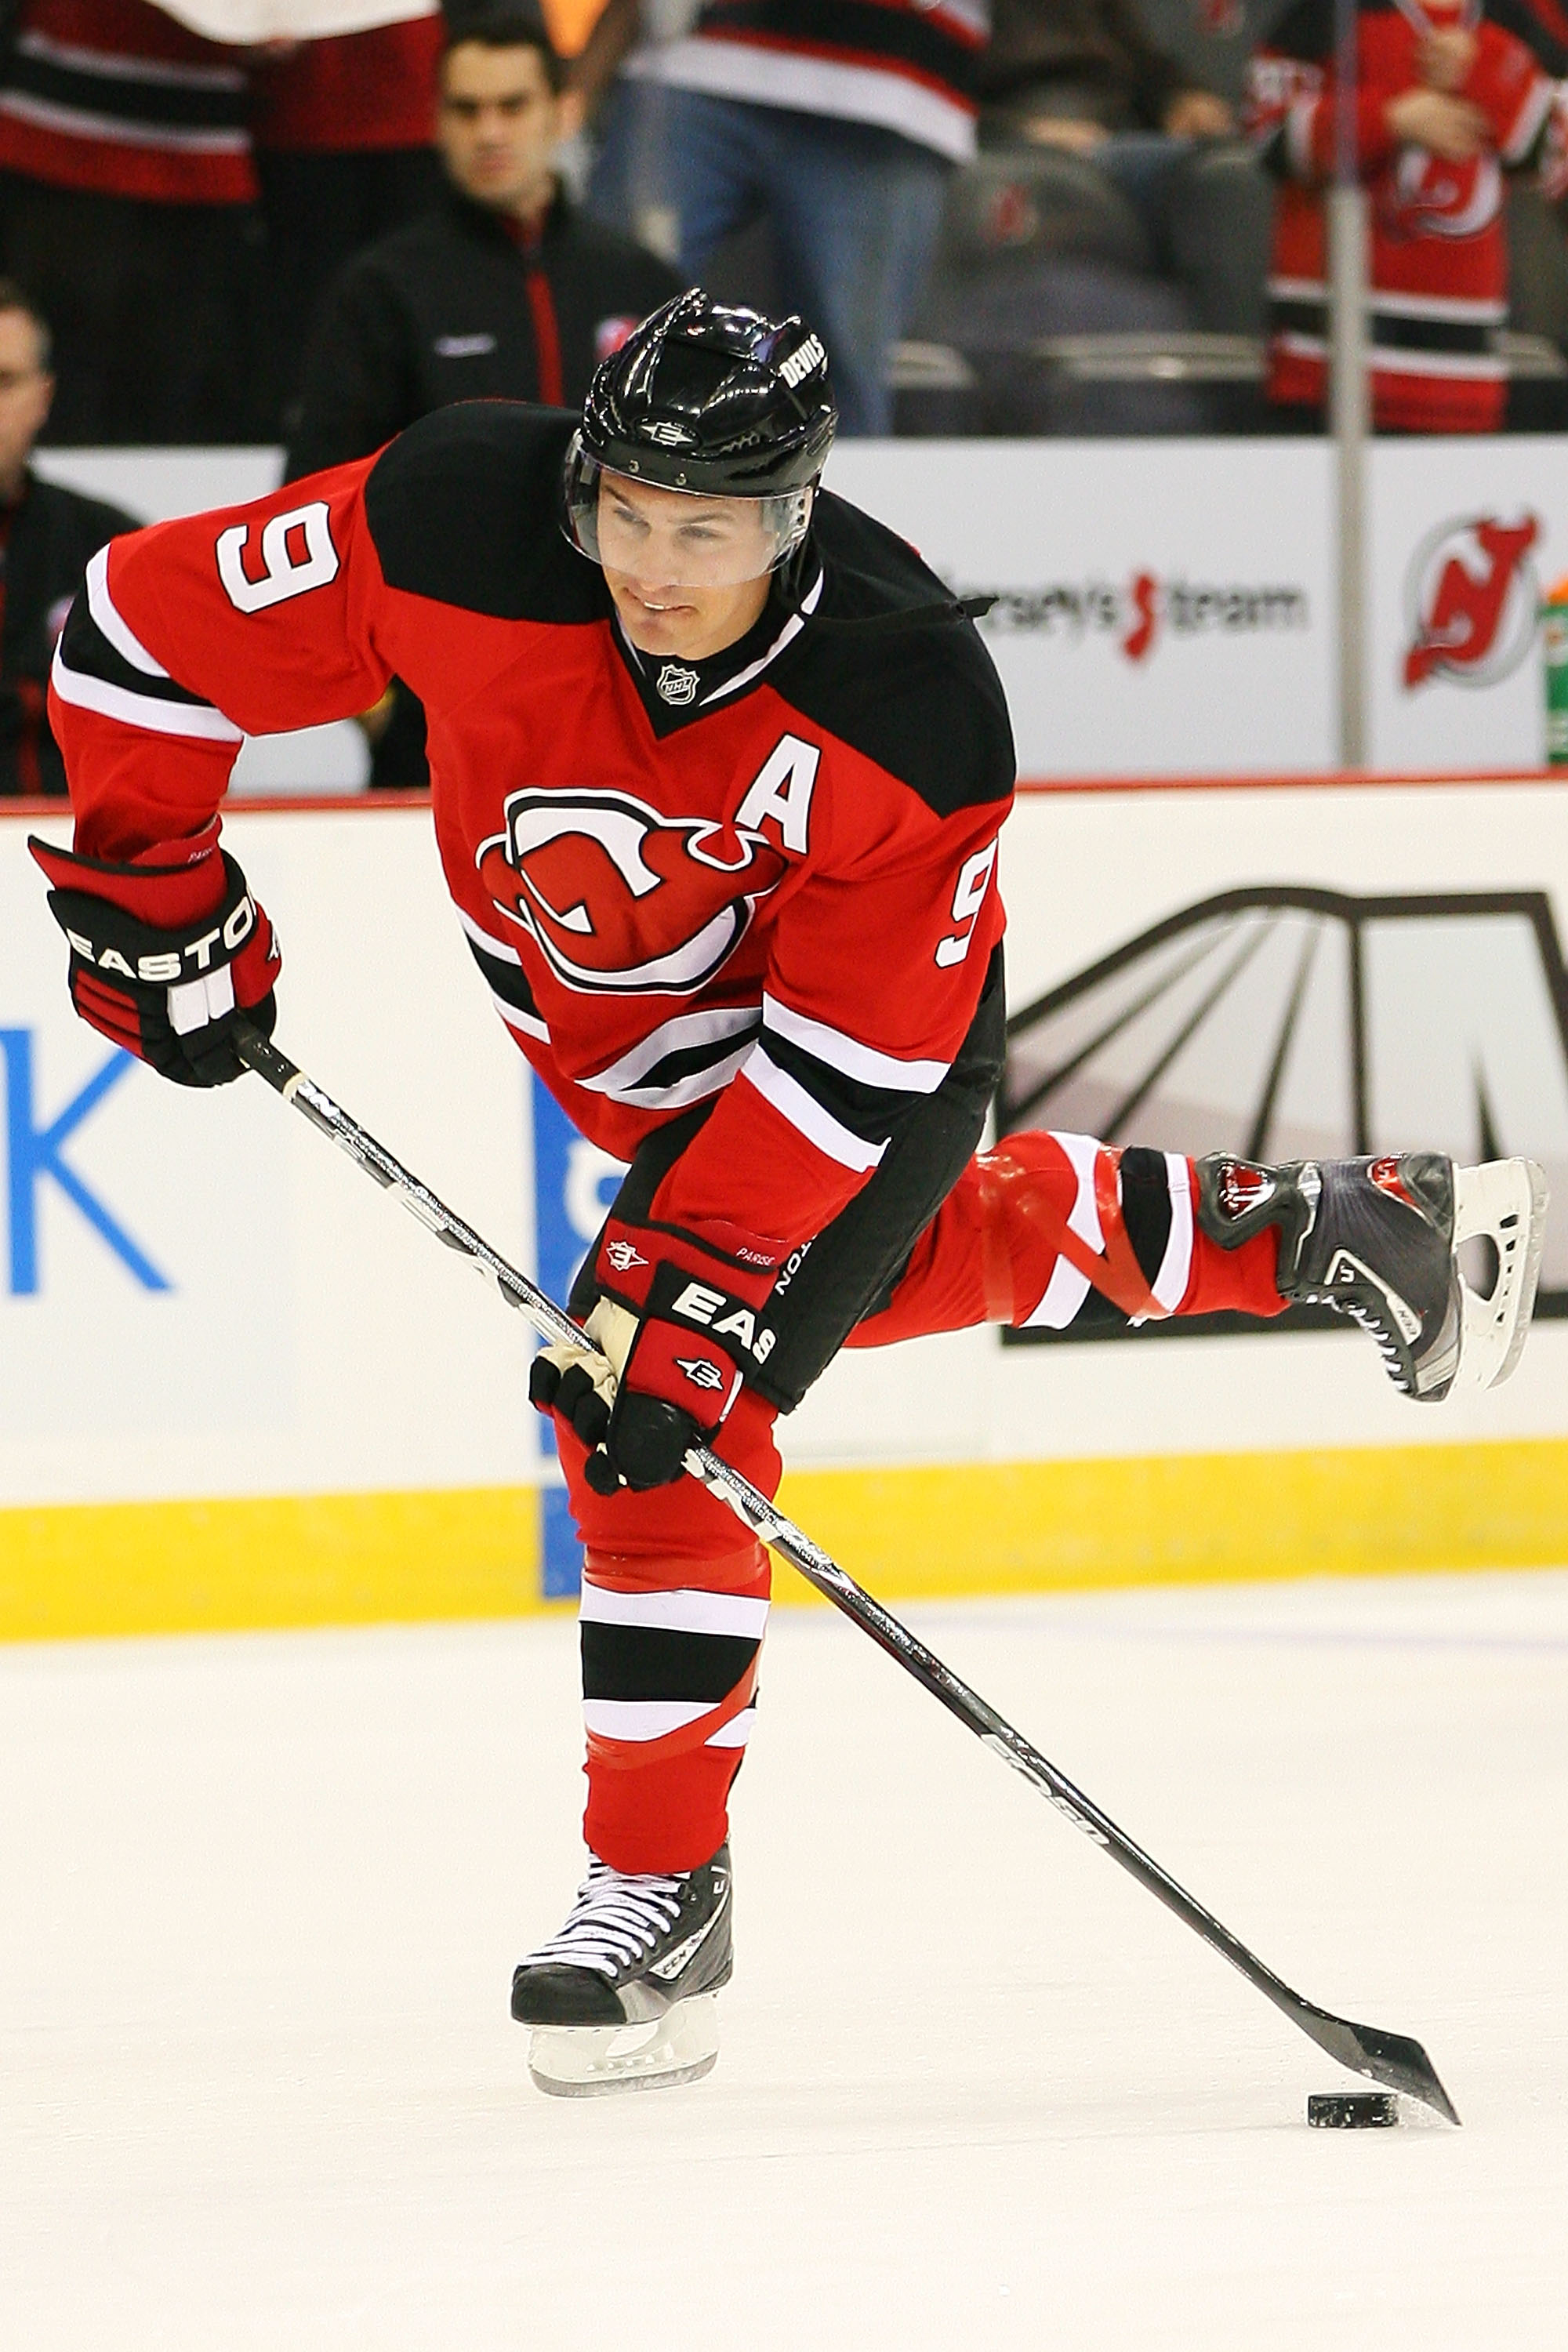 New Jersey Devils' Zach Parise celebrates after scoring an empty-net goal  during the third period of an NHL hockey game against the New York Rangers  on Monday, Feb. 9, 2009 in Newark